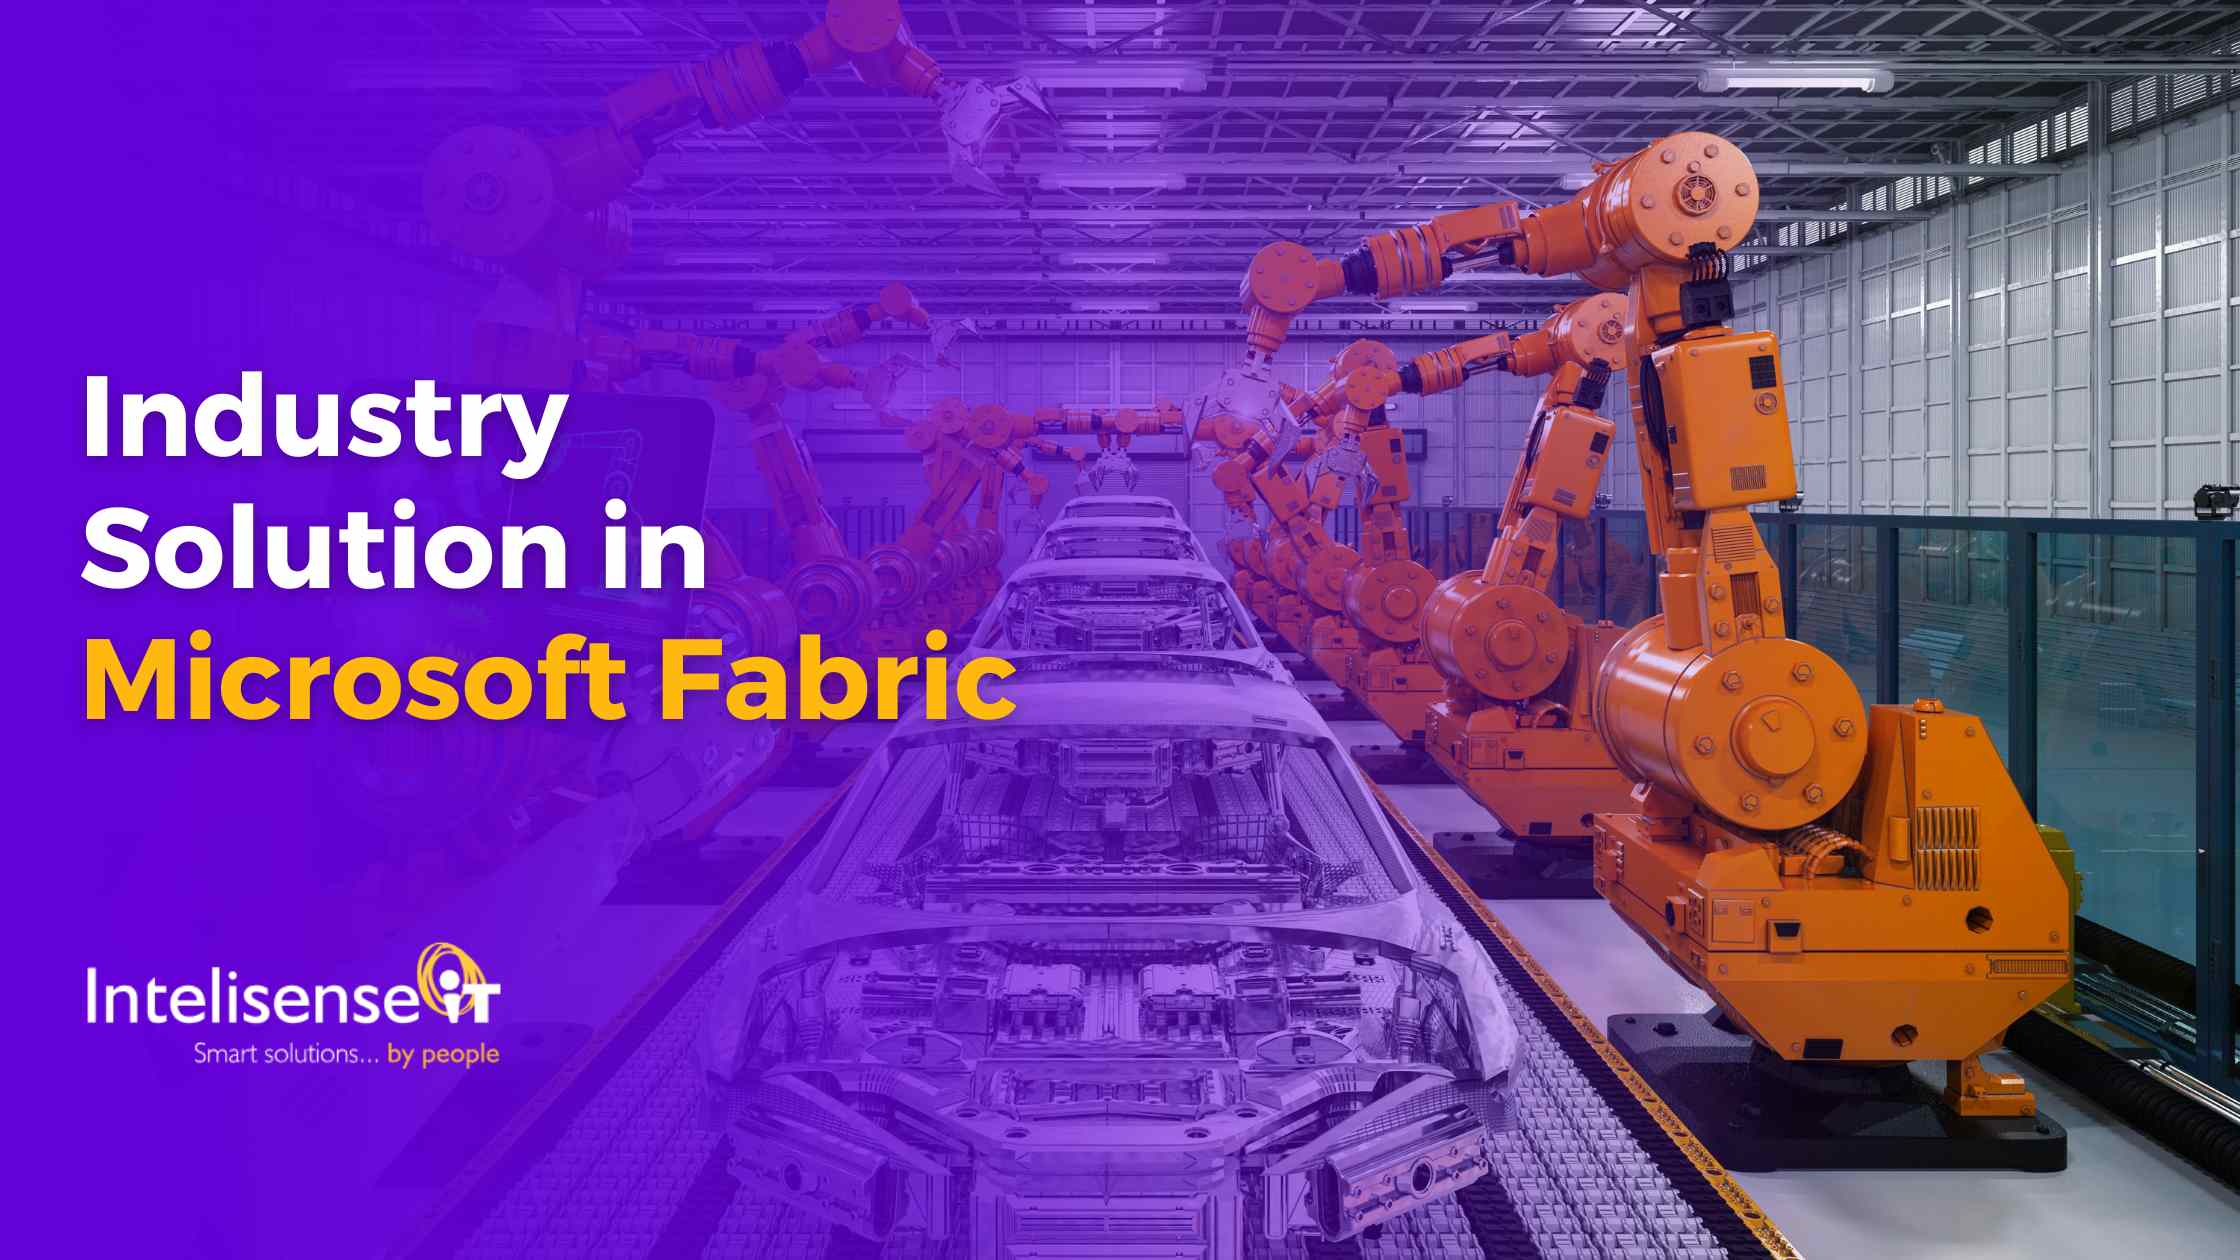 Industry Solution in Microsoft Fabric